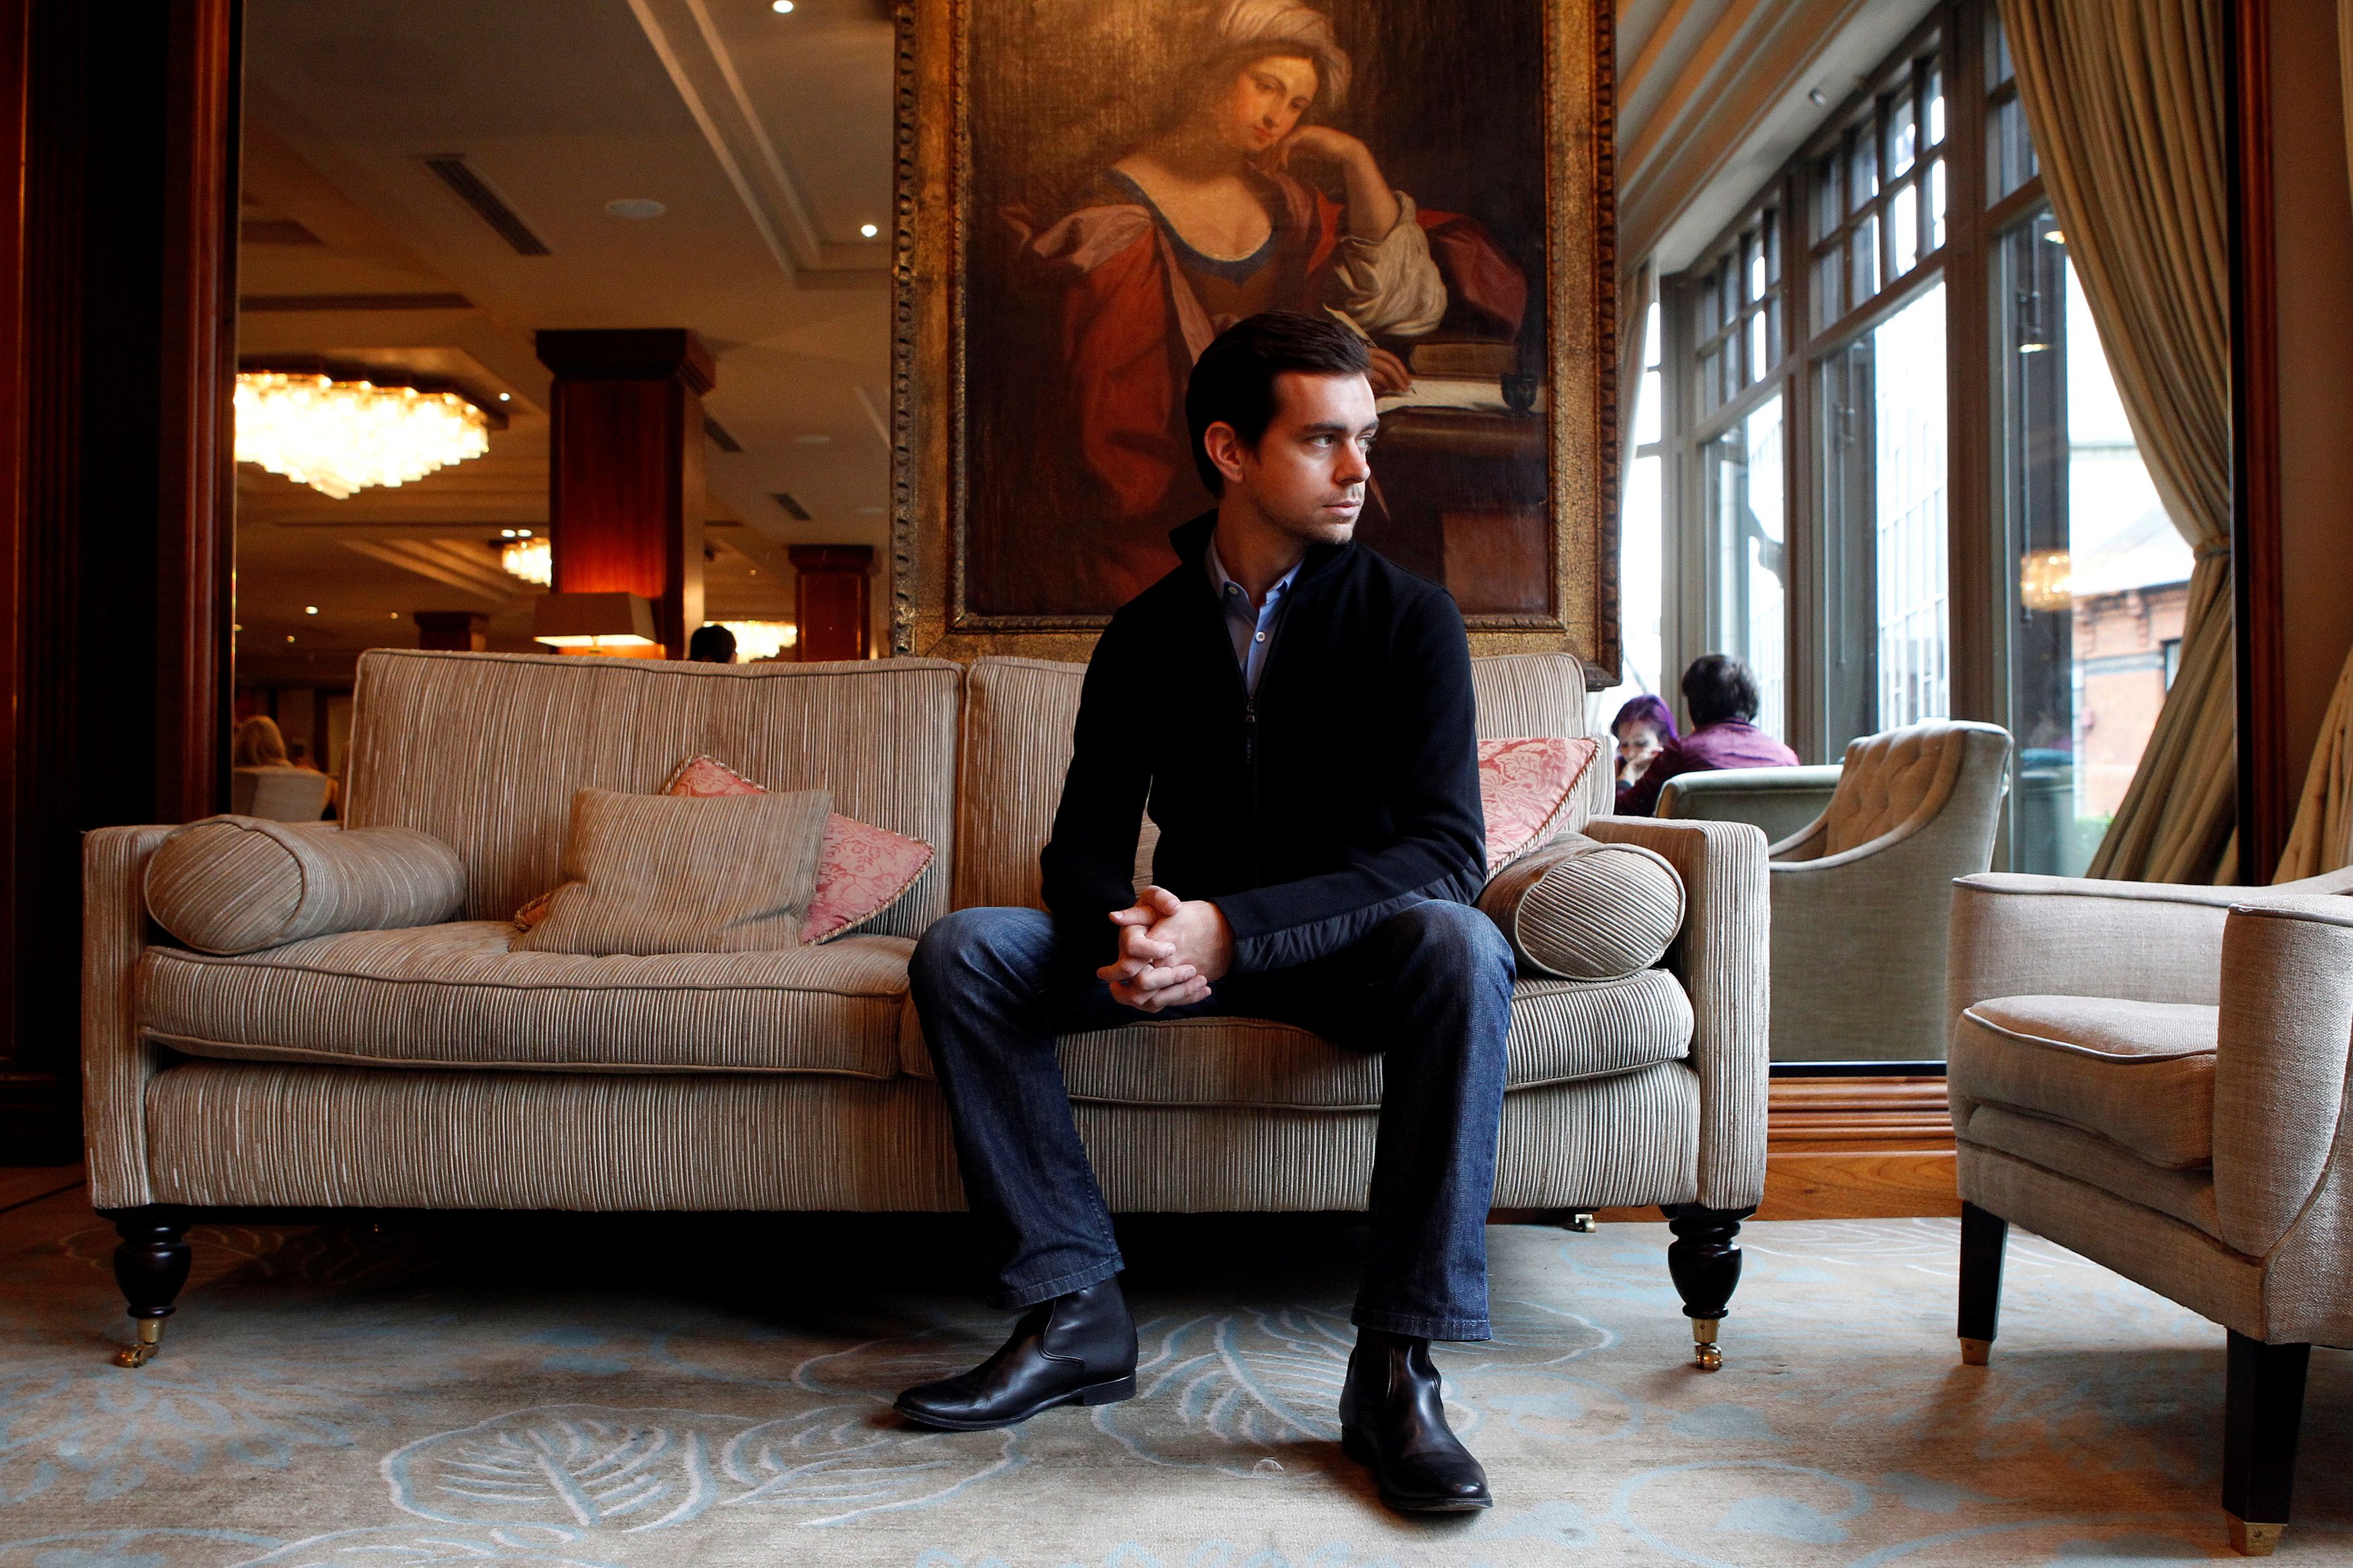 Twitter's Chairman Jack Dorsey attends a photocall in the Westbury Hotel to mark the opening of Founders in Dublin